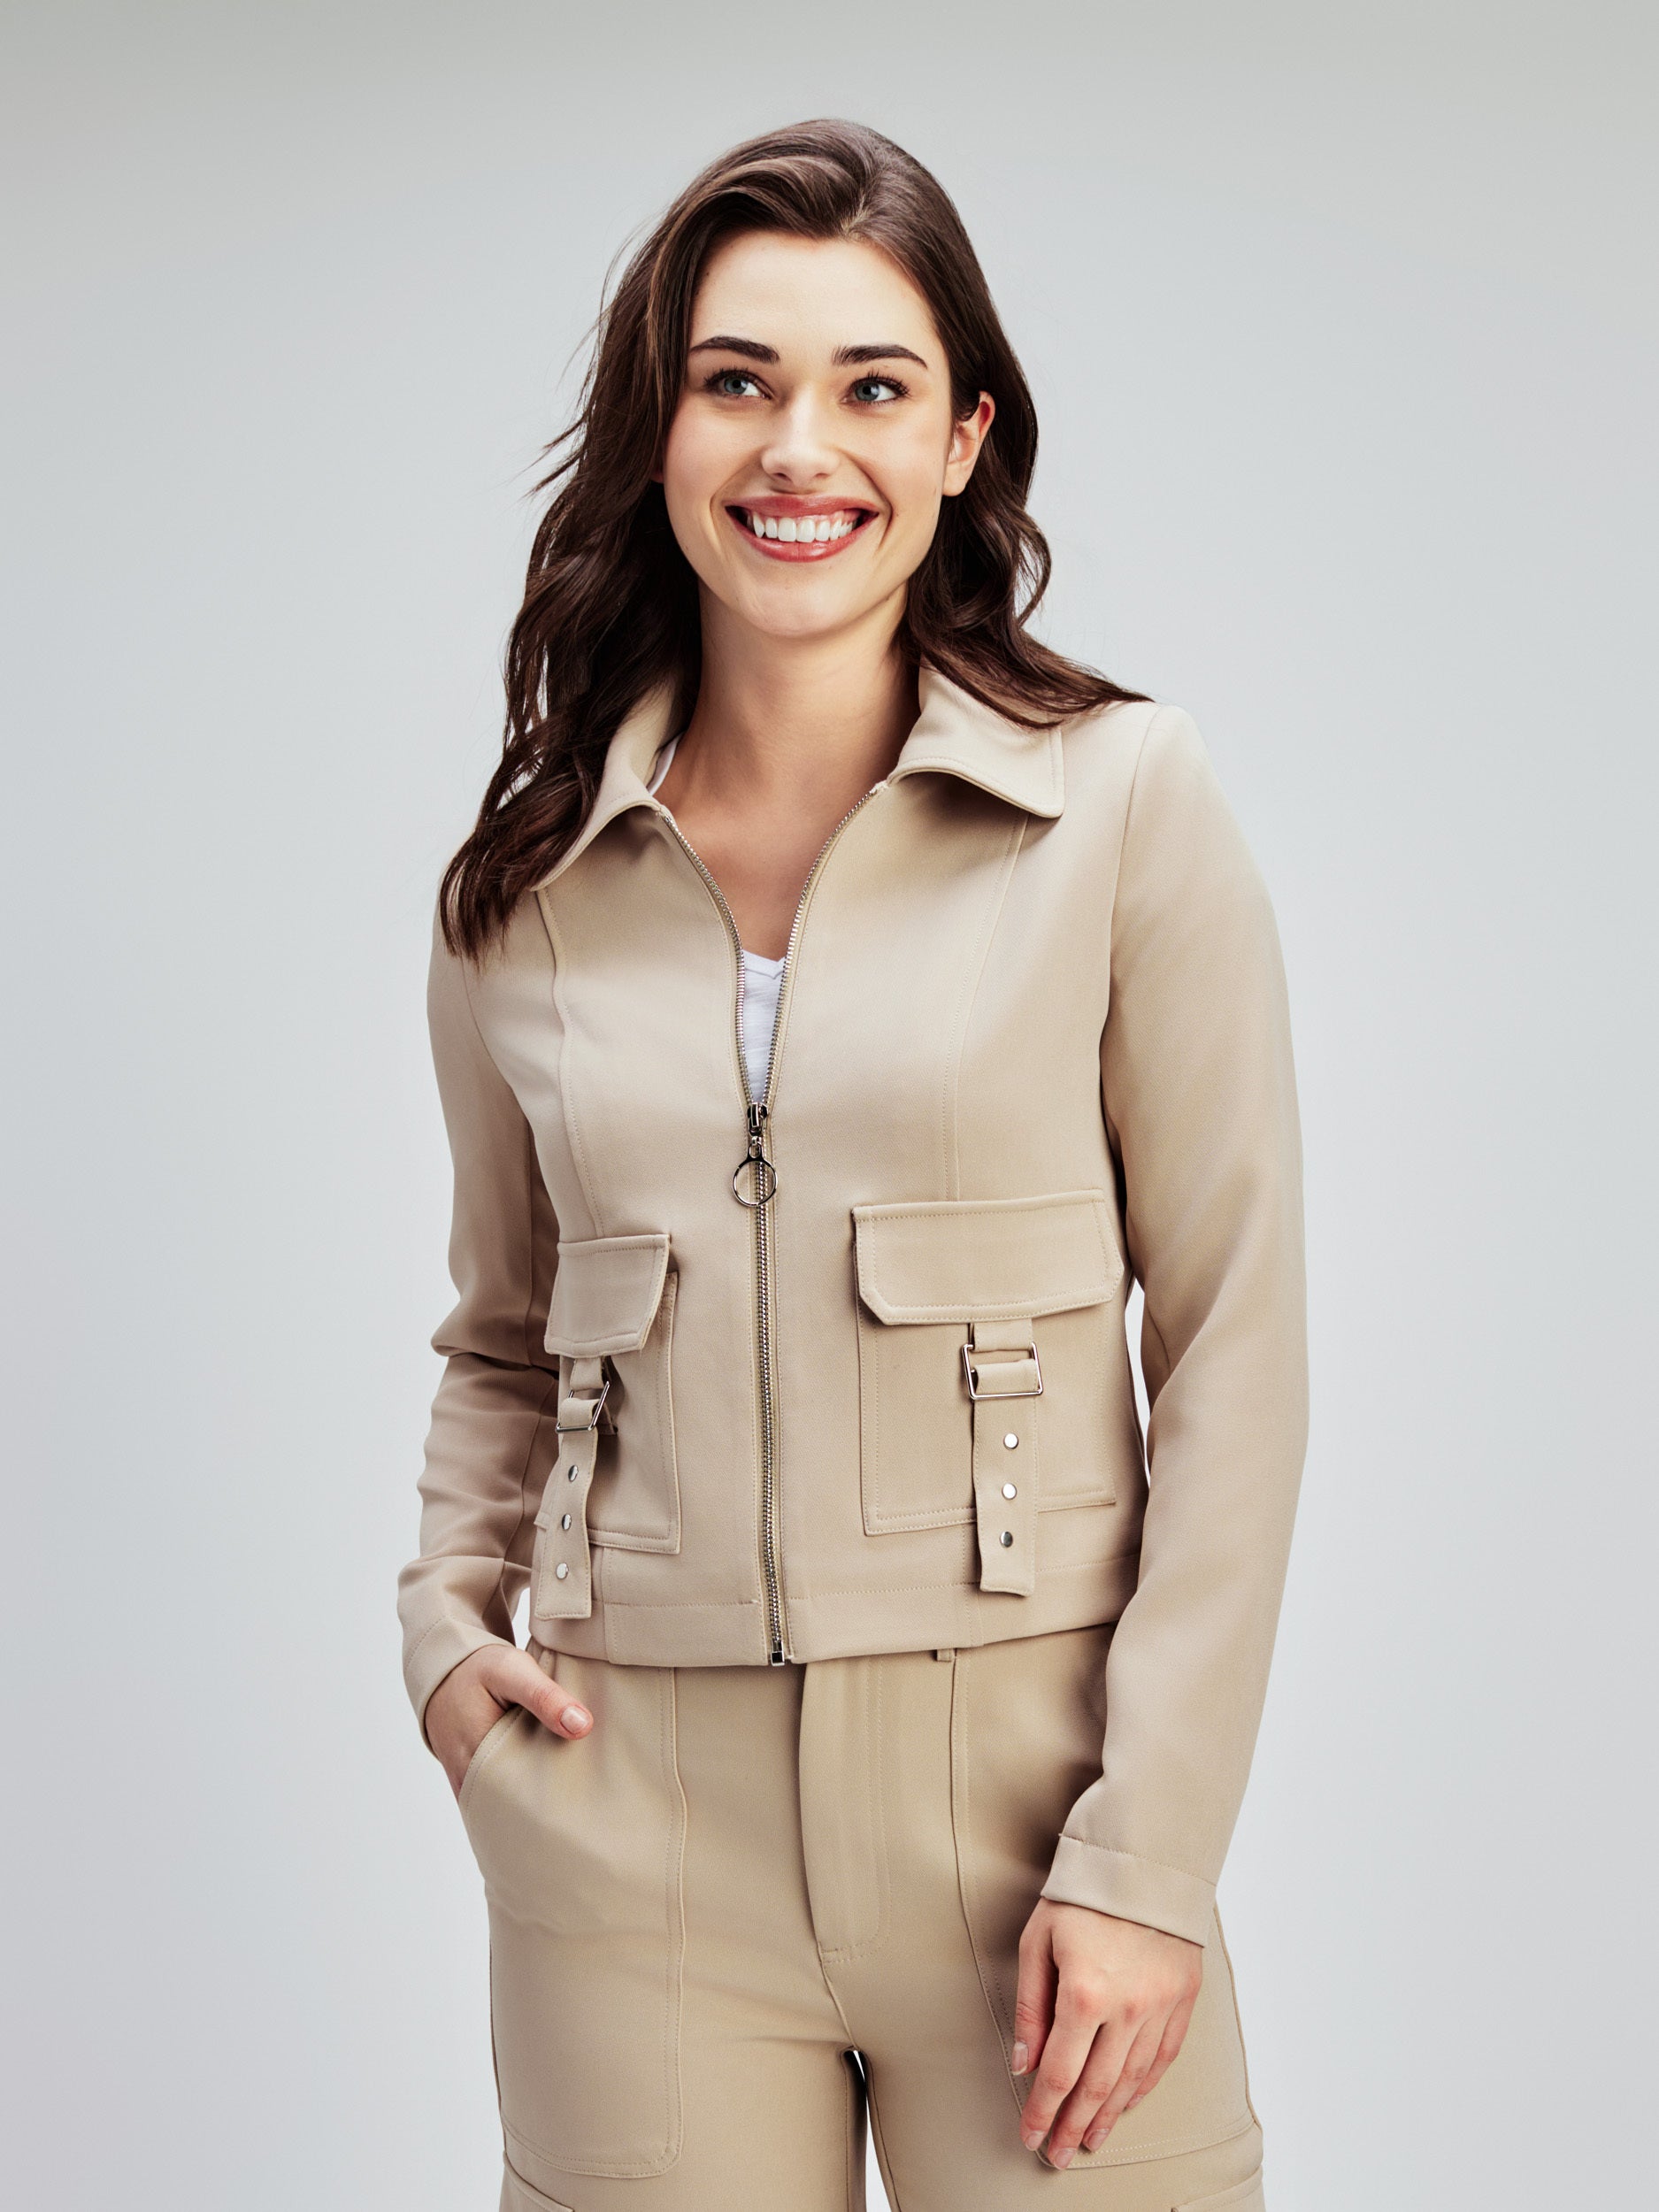 Long-sleeve semi-fitted vest